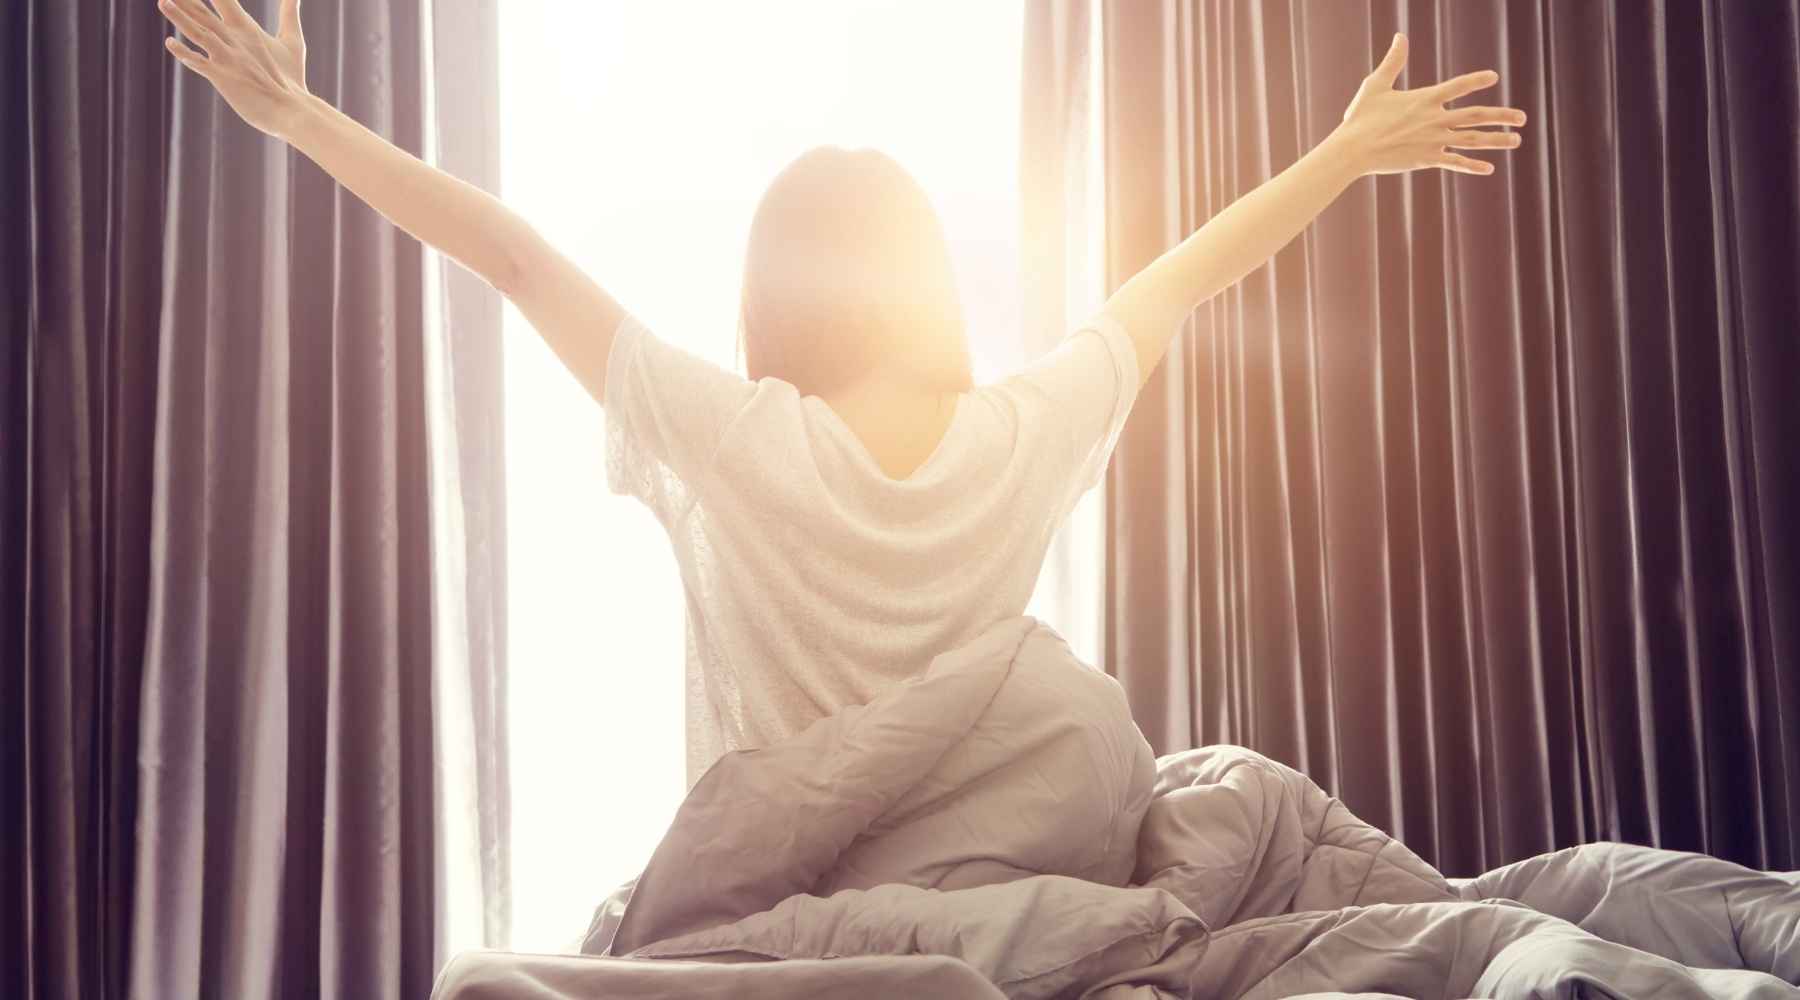 5 Easy Ways to Increase Energy Levels - Feed Your Spirit